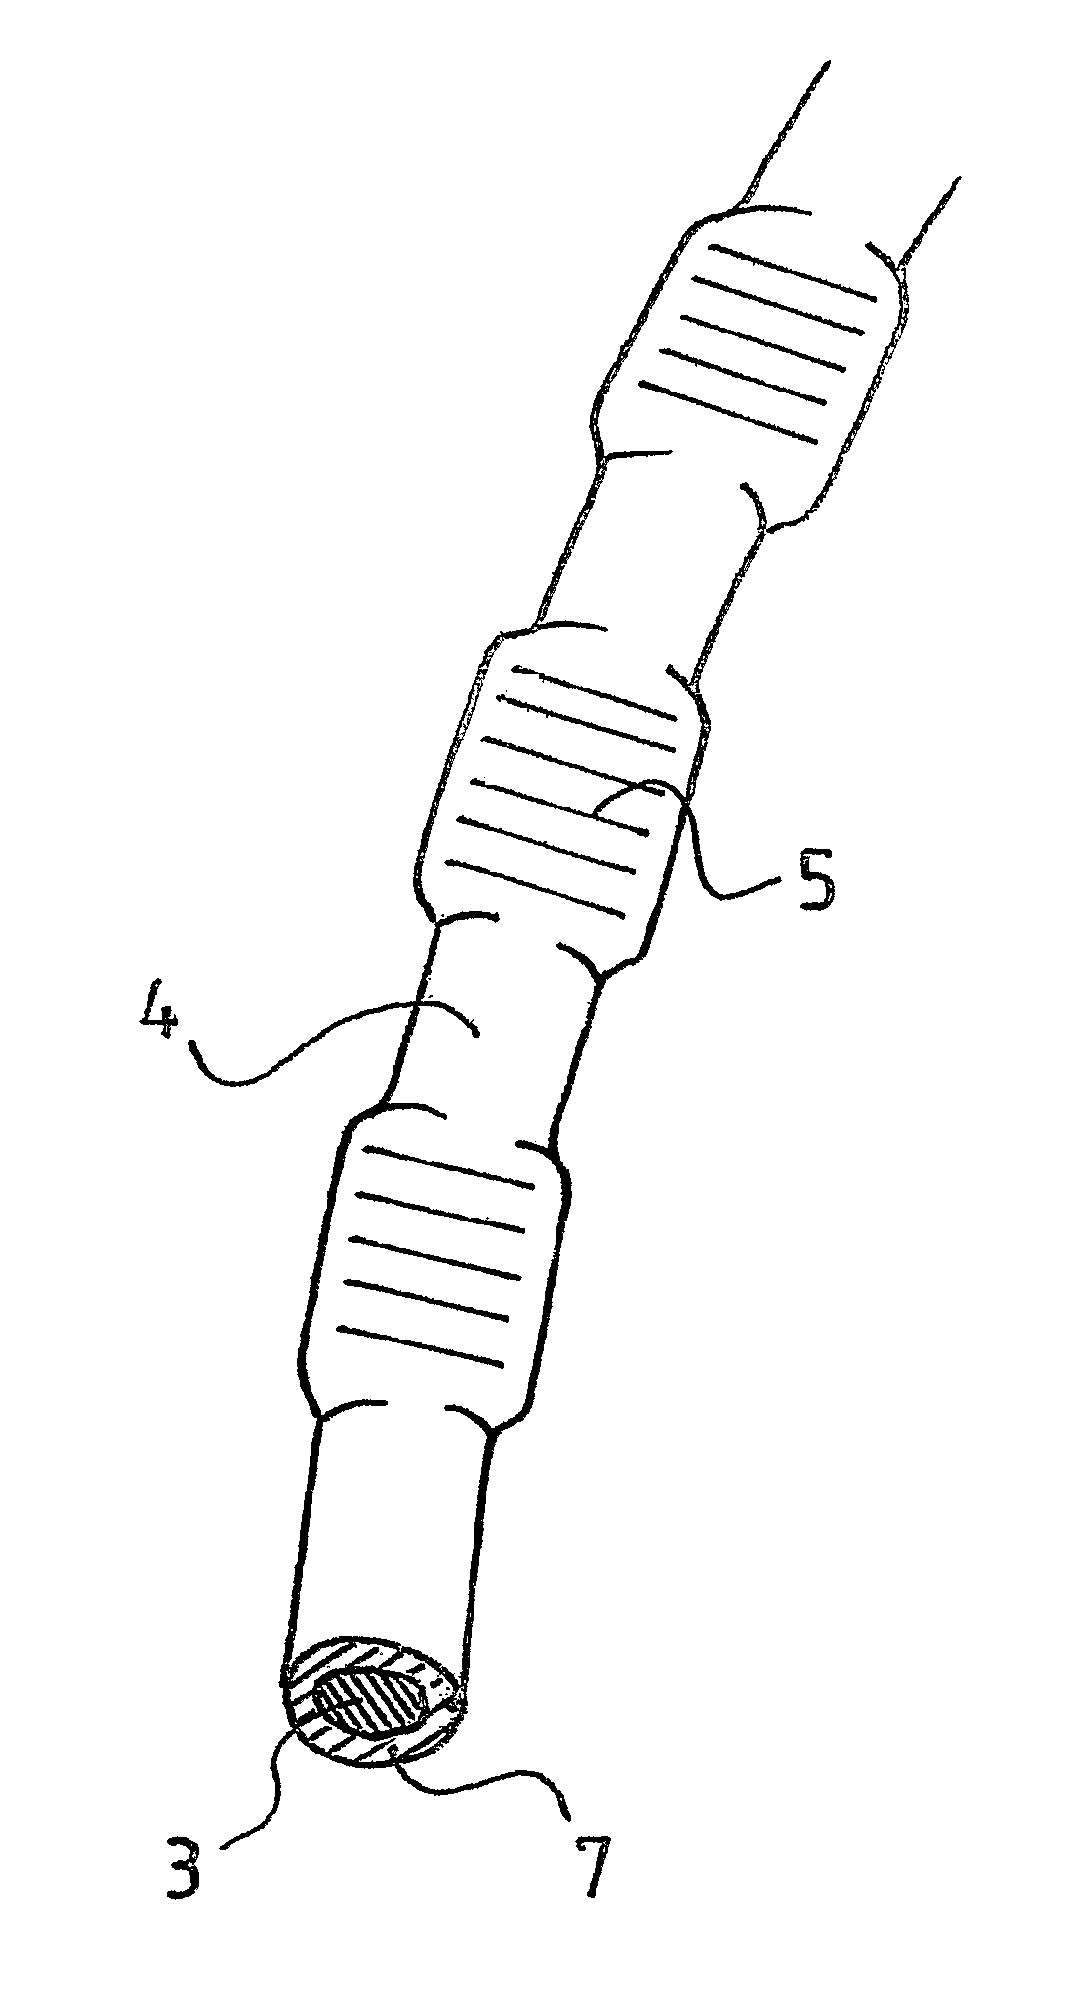 Process for making plastic fibers for application in concrete